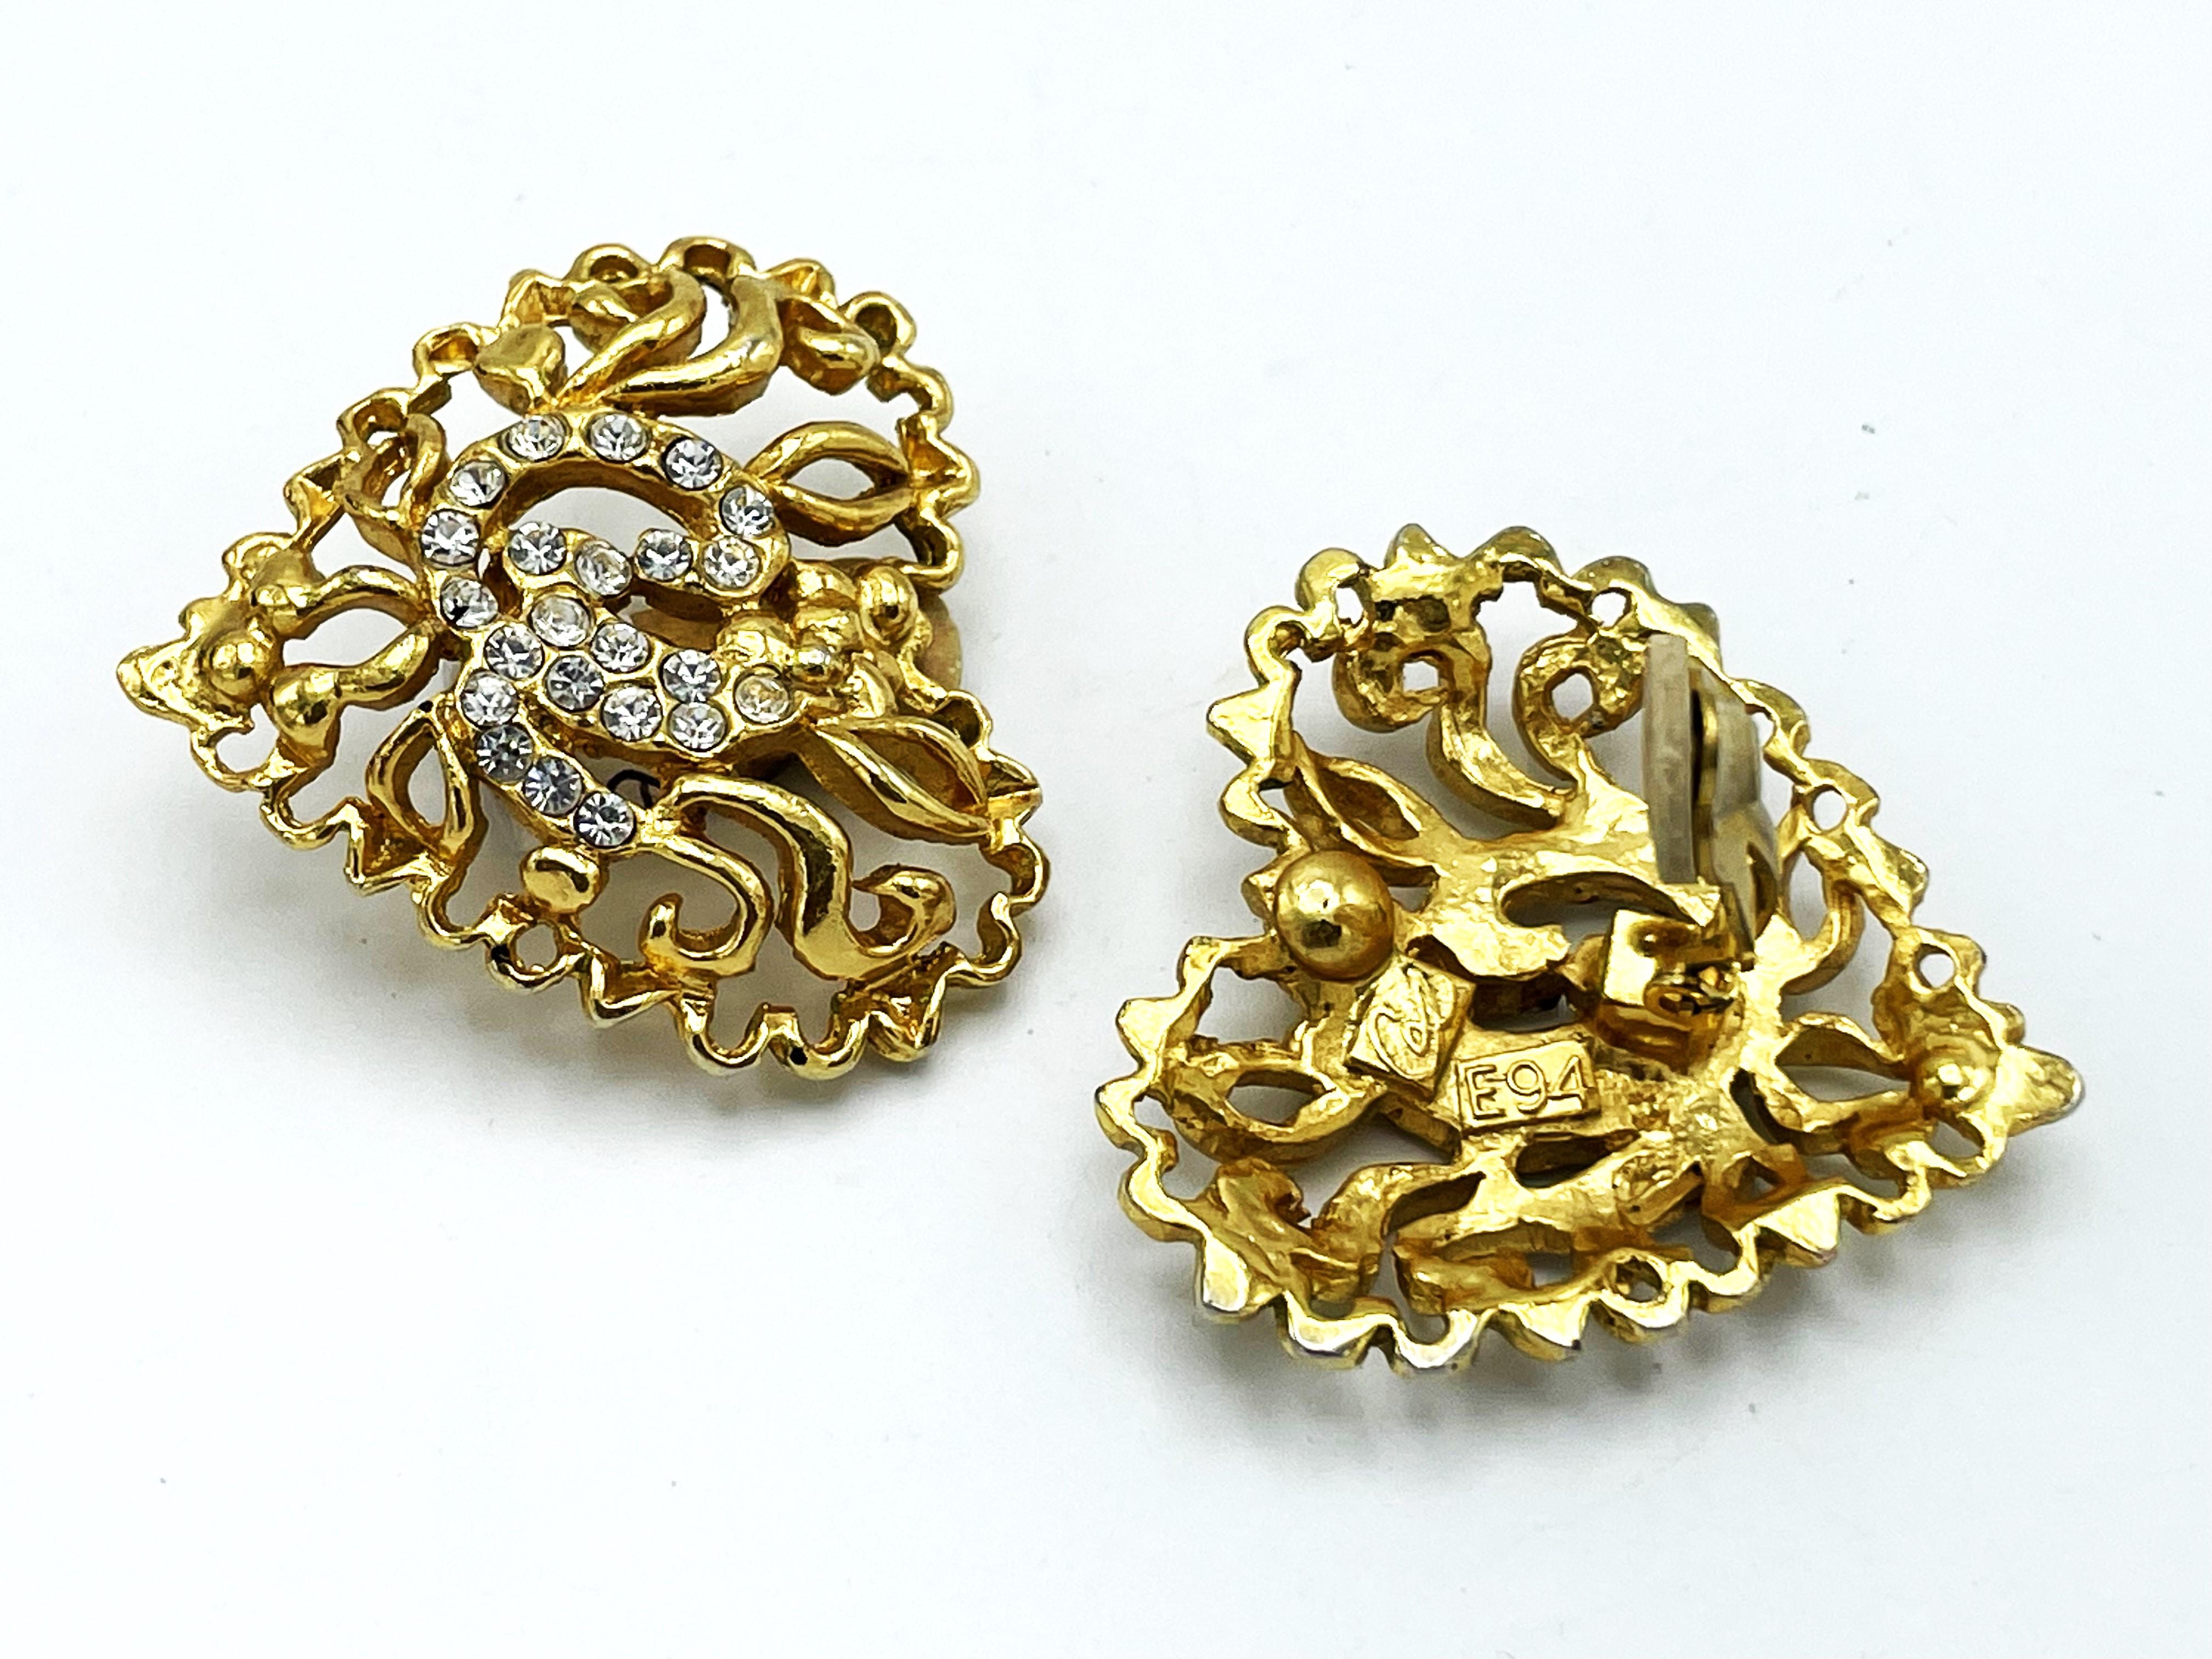 CLIP-ON EARRING by Christian Lacroix Paris, openwork heart, gold-plated, E 95 For Sale 1